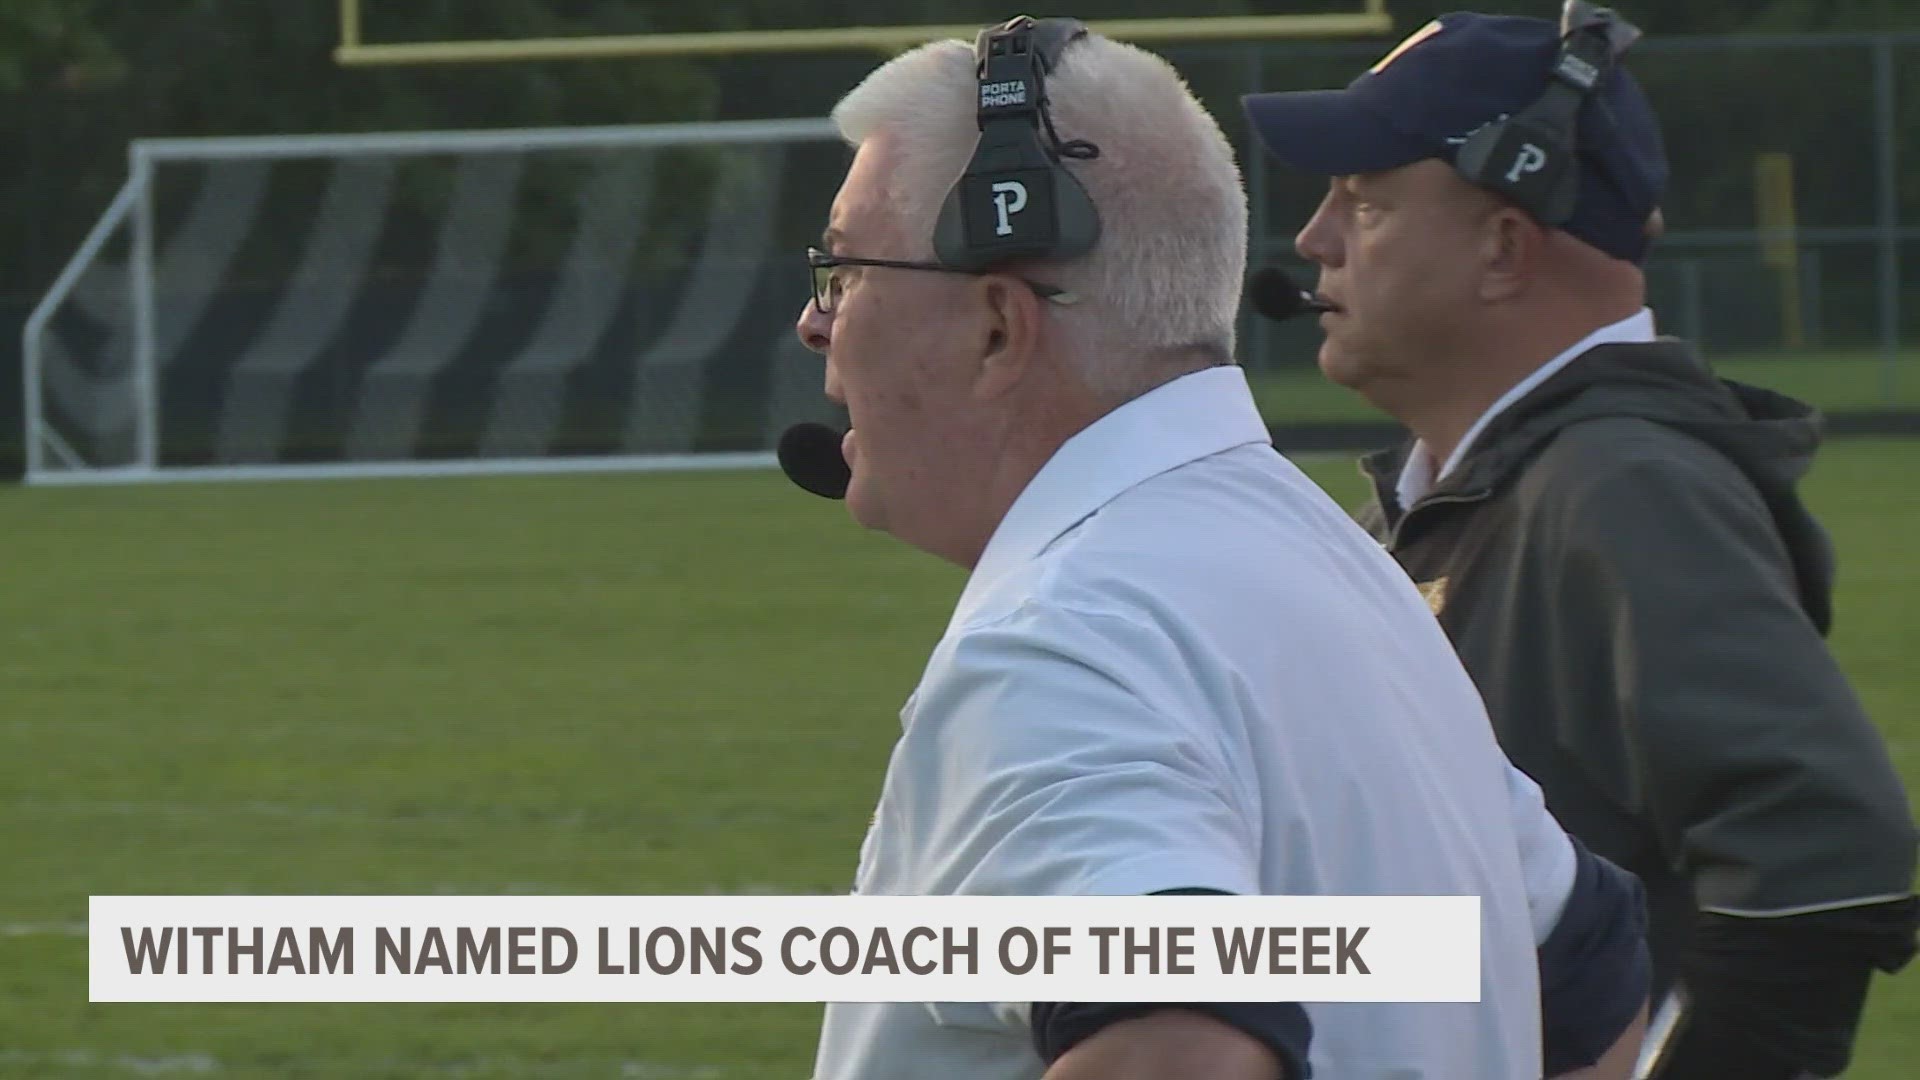 North Muskegon coach named Lions HS football coach of the week